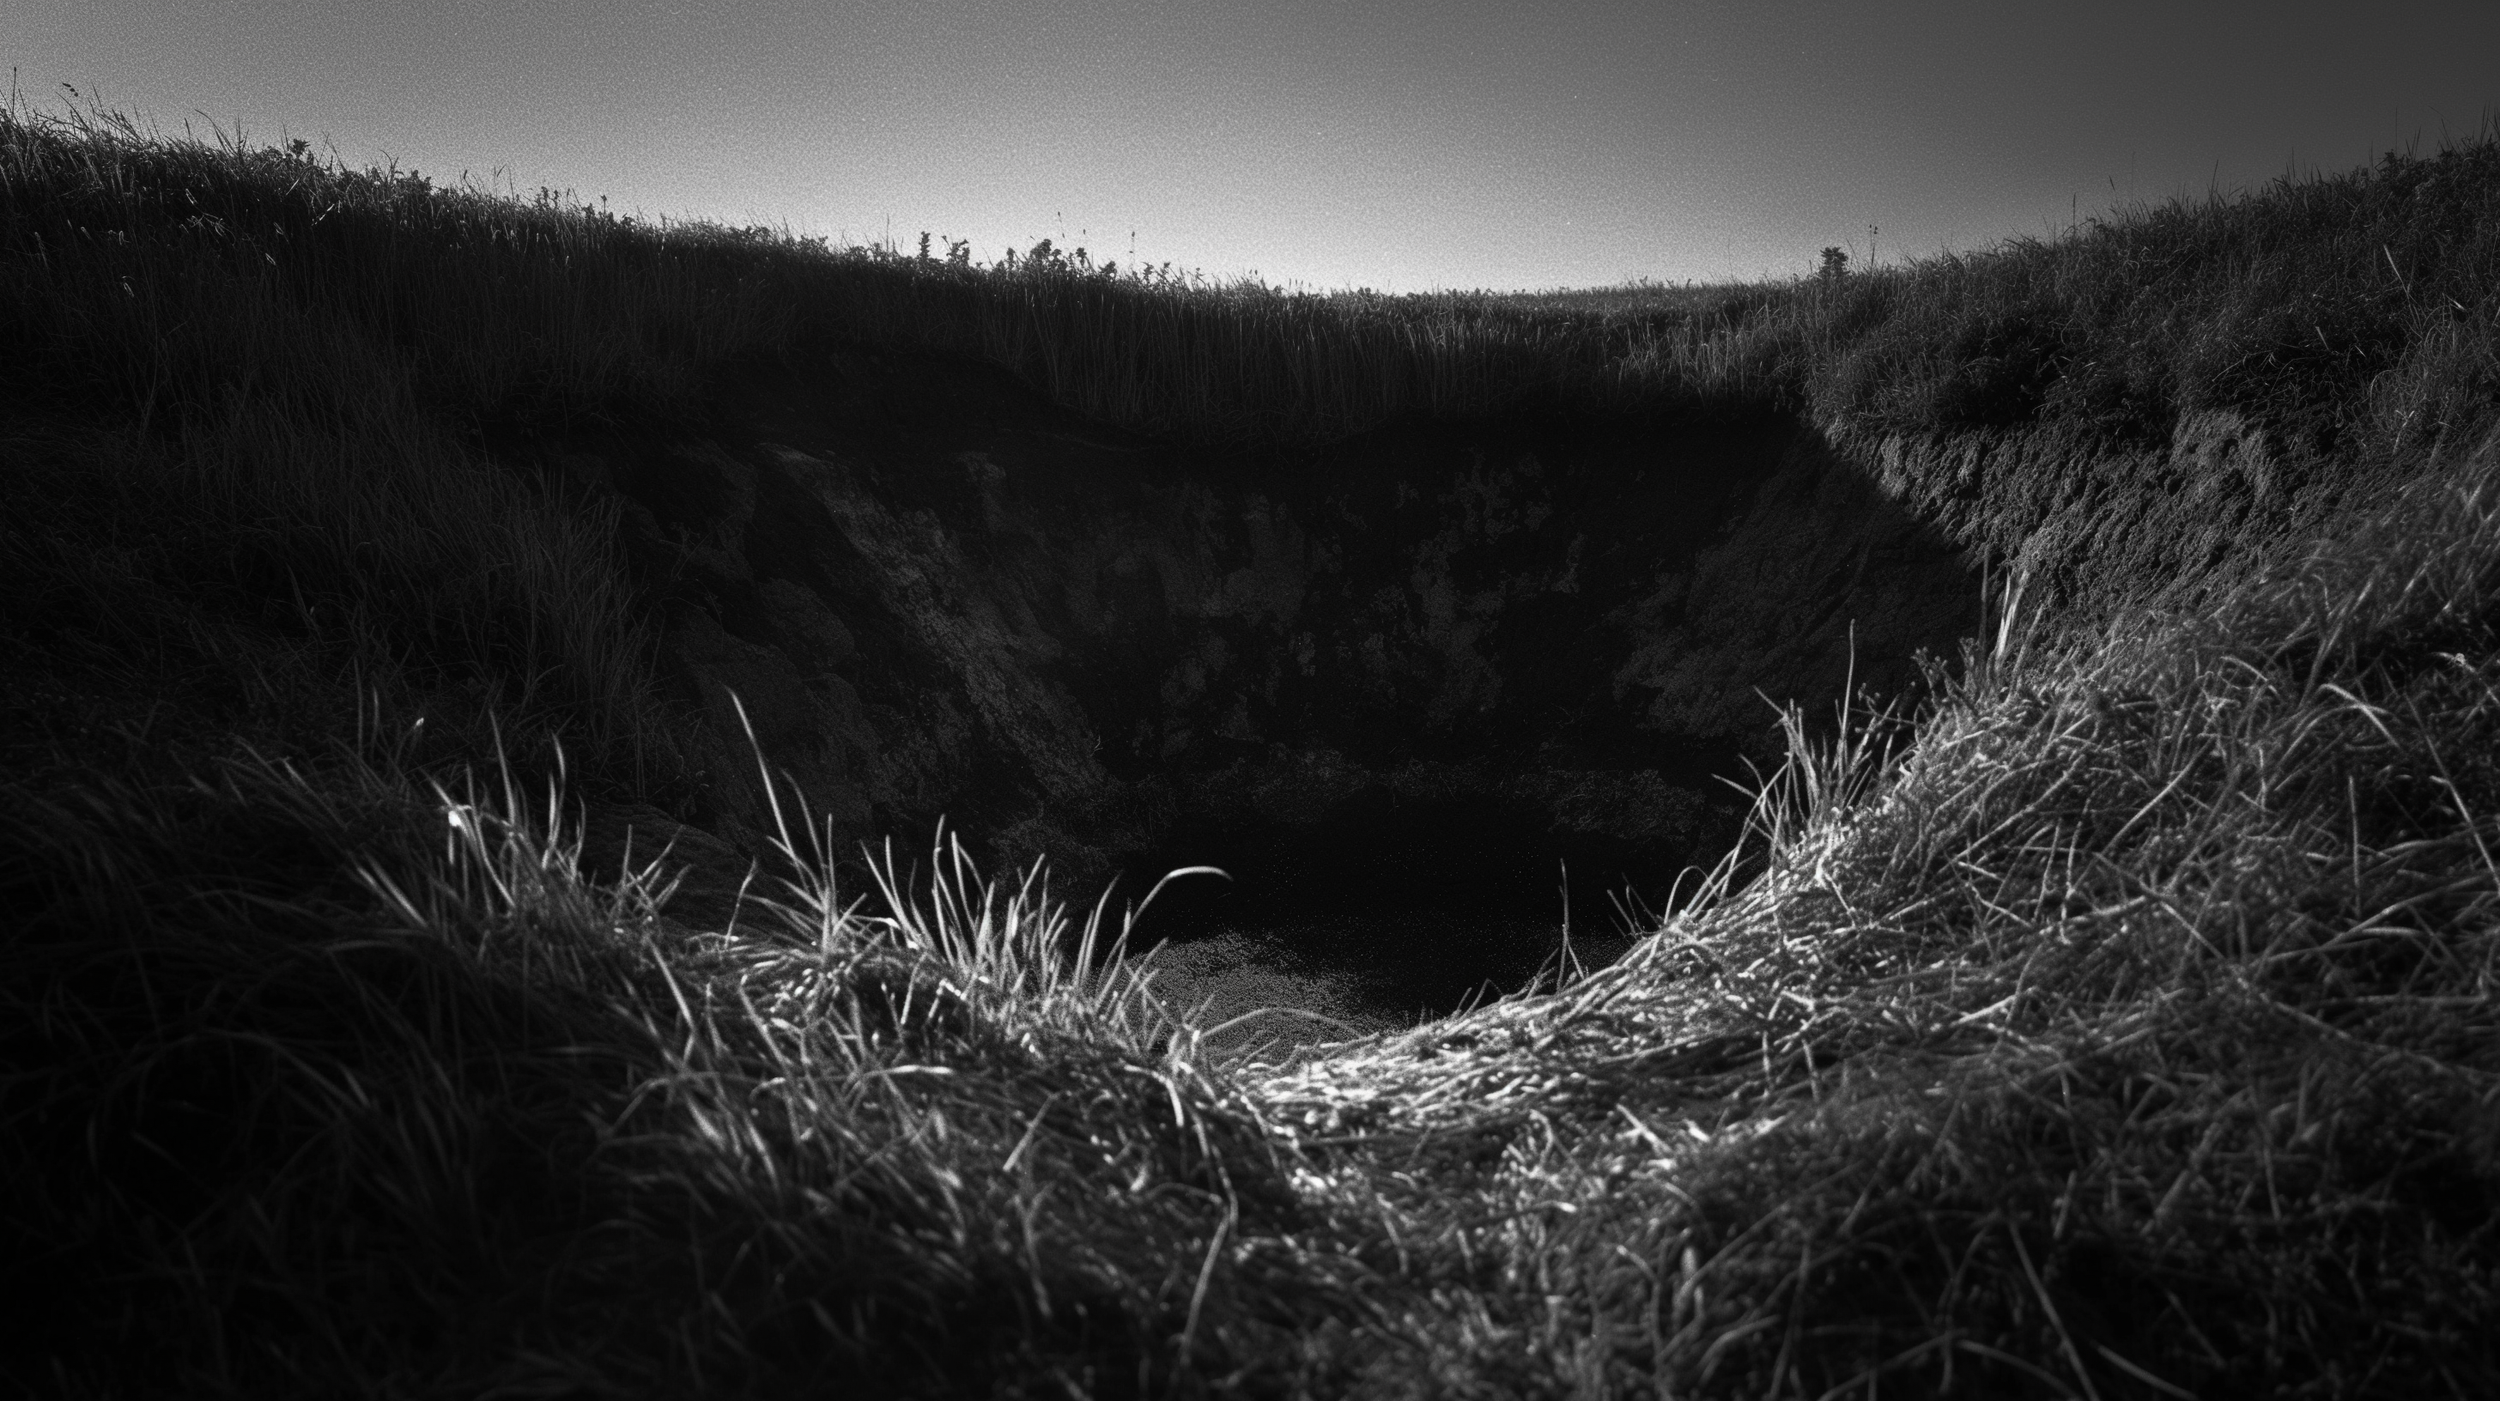 wrathcorp_grassy_opening_to_hell_mythology_hillside_entrance_to_4b4089d9-562e-414d-b0d0-38fbc639fcaa.png